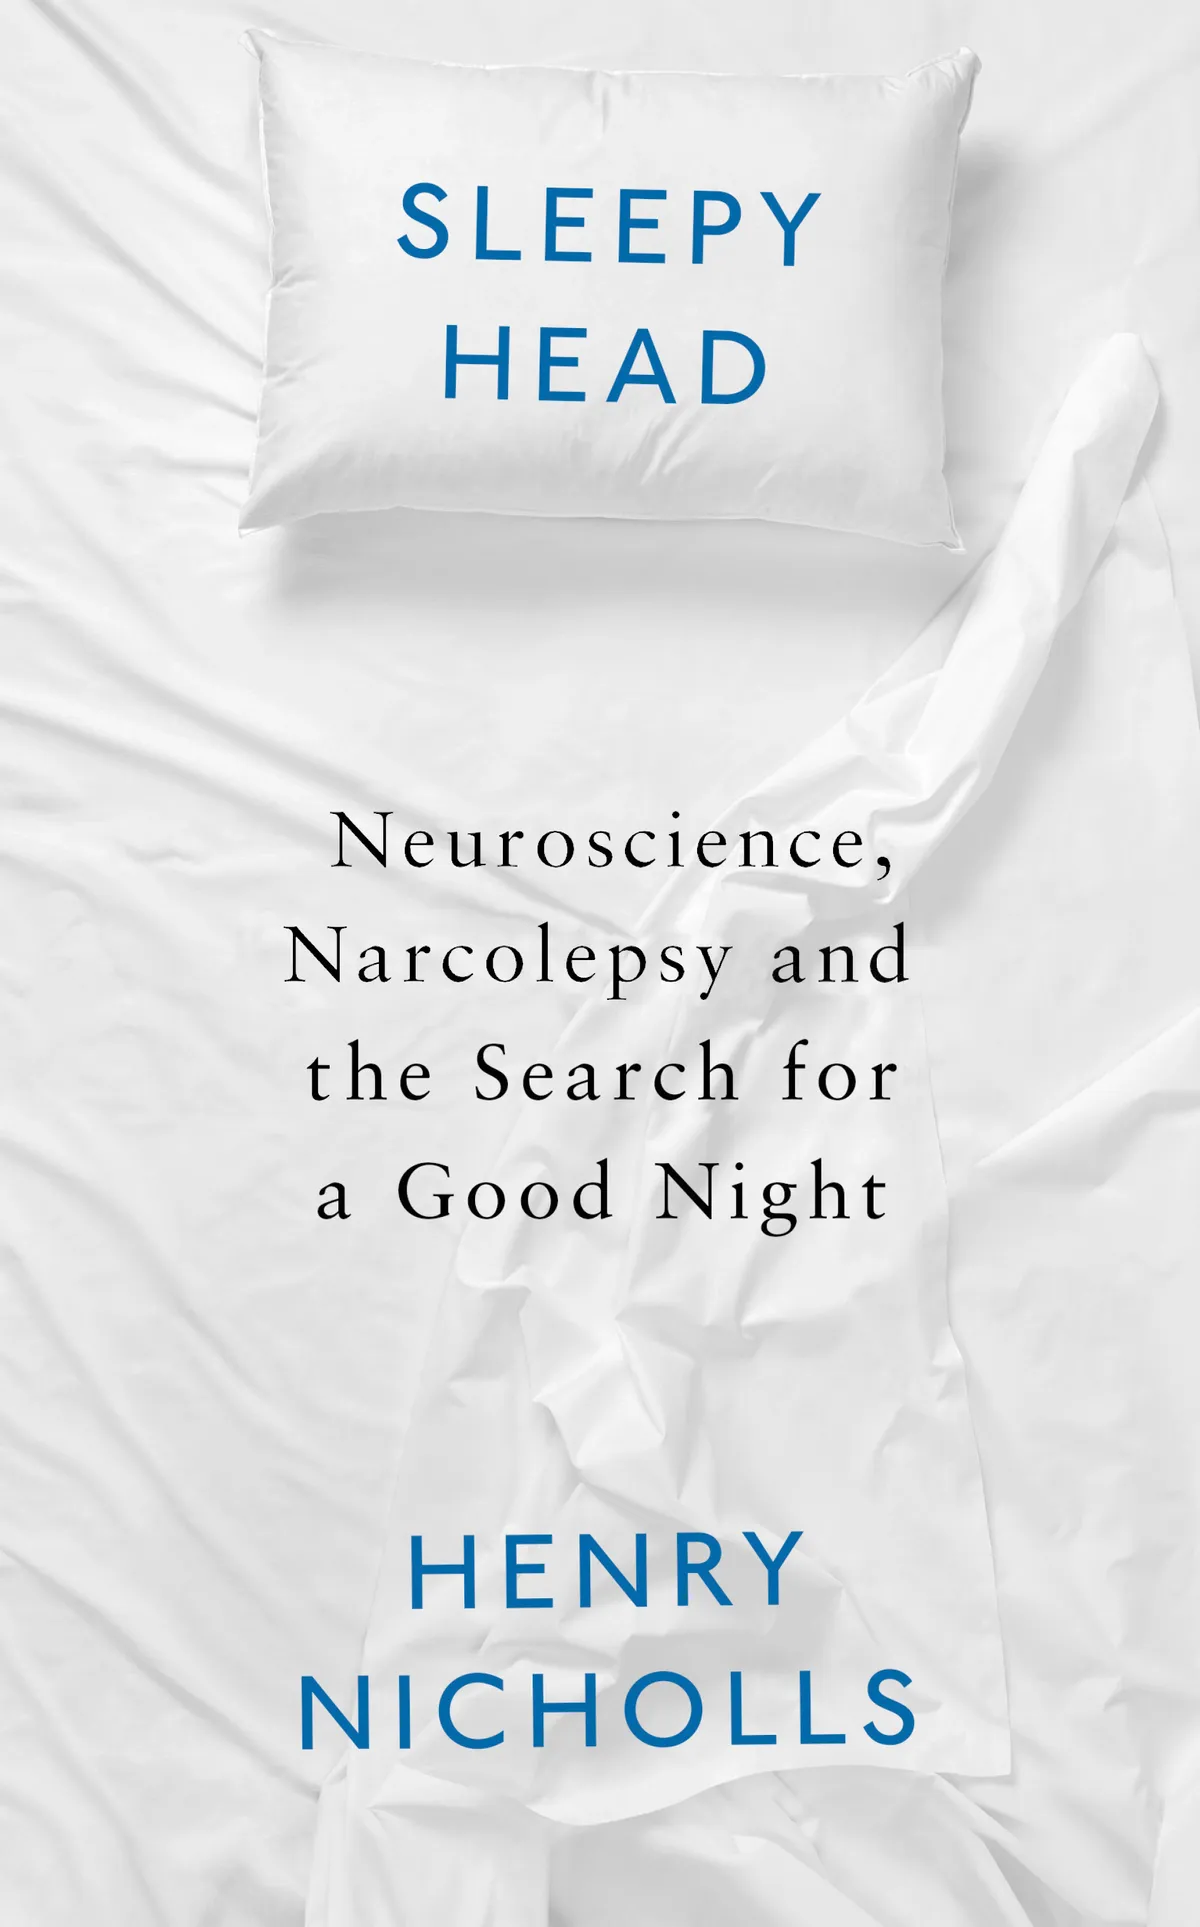 Sleepyhead: Neuroscience, narcolepsy and the search for a good night